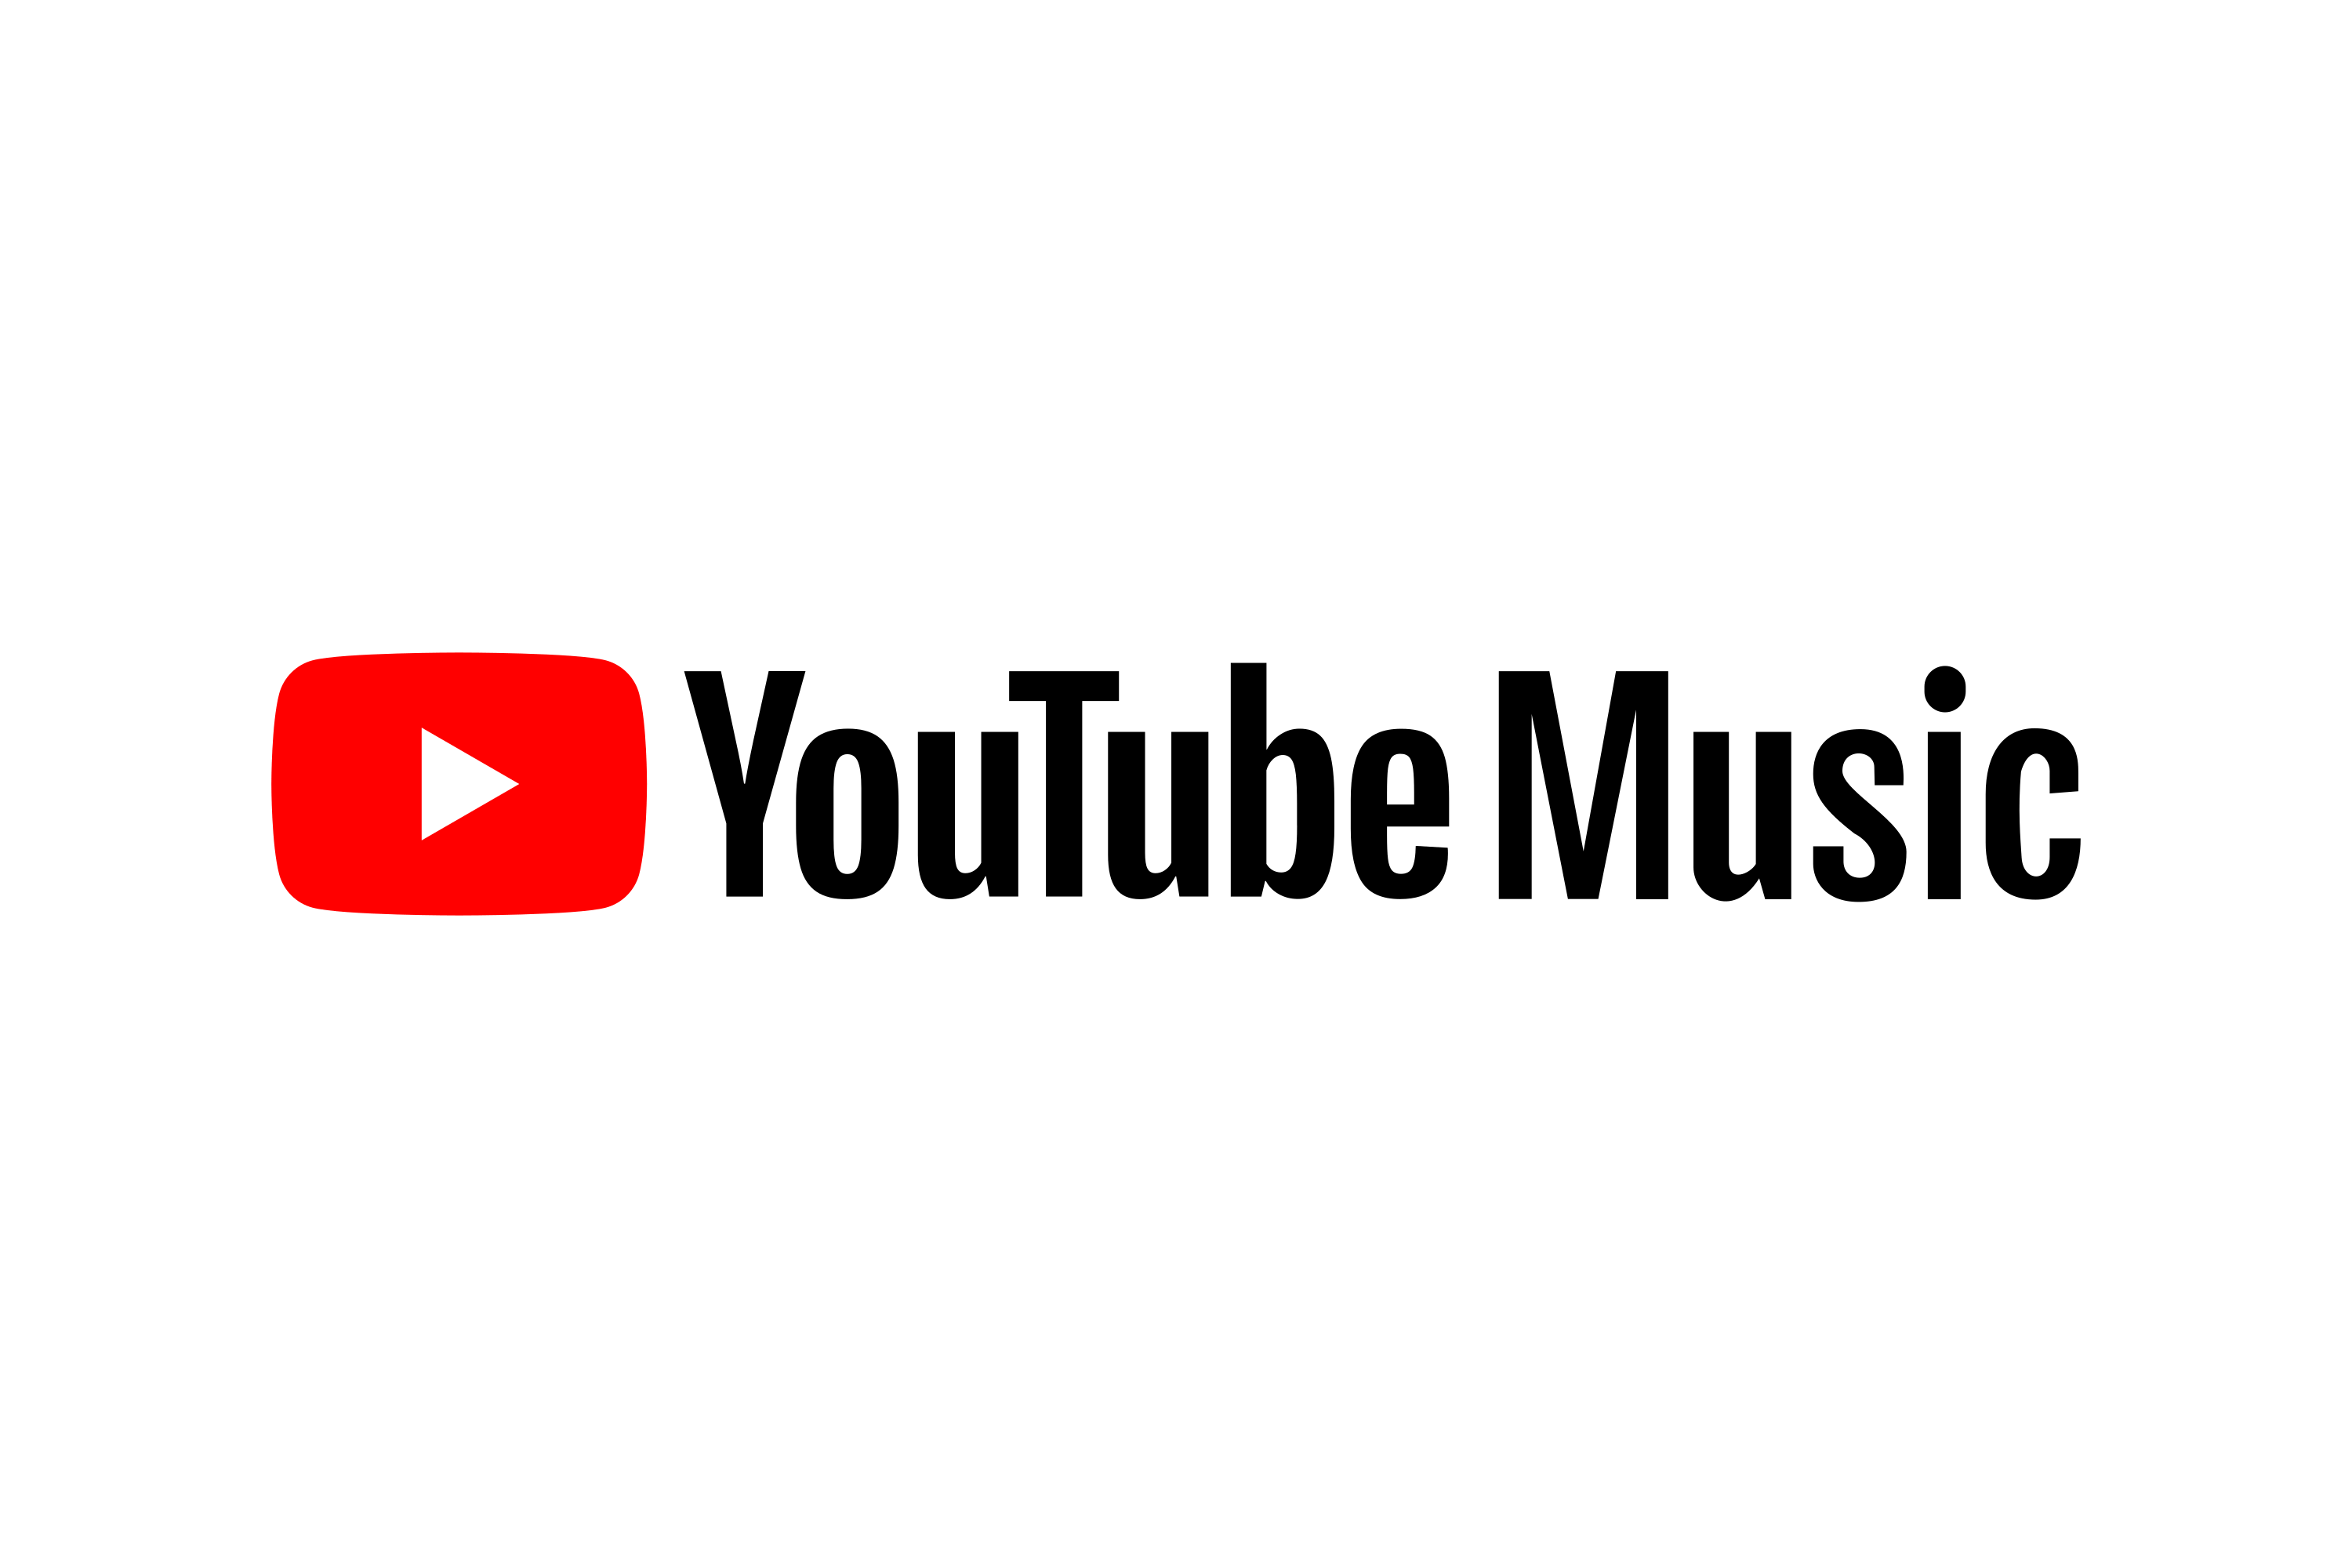 YouTube Music Logo - Free download logo in SVG or PNG format